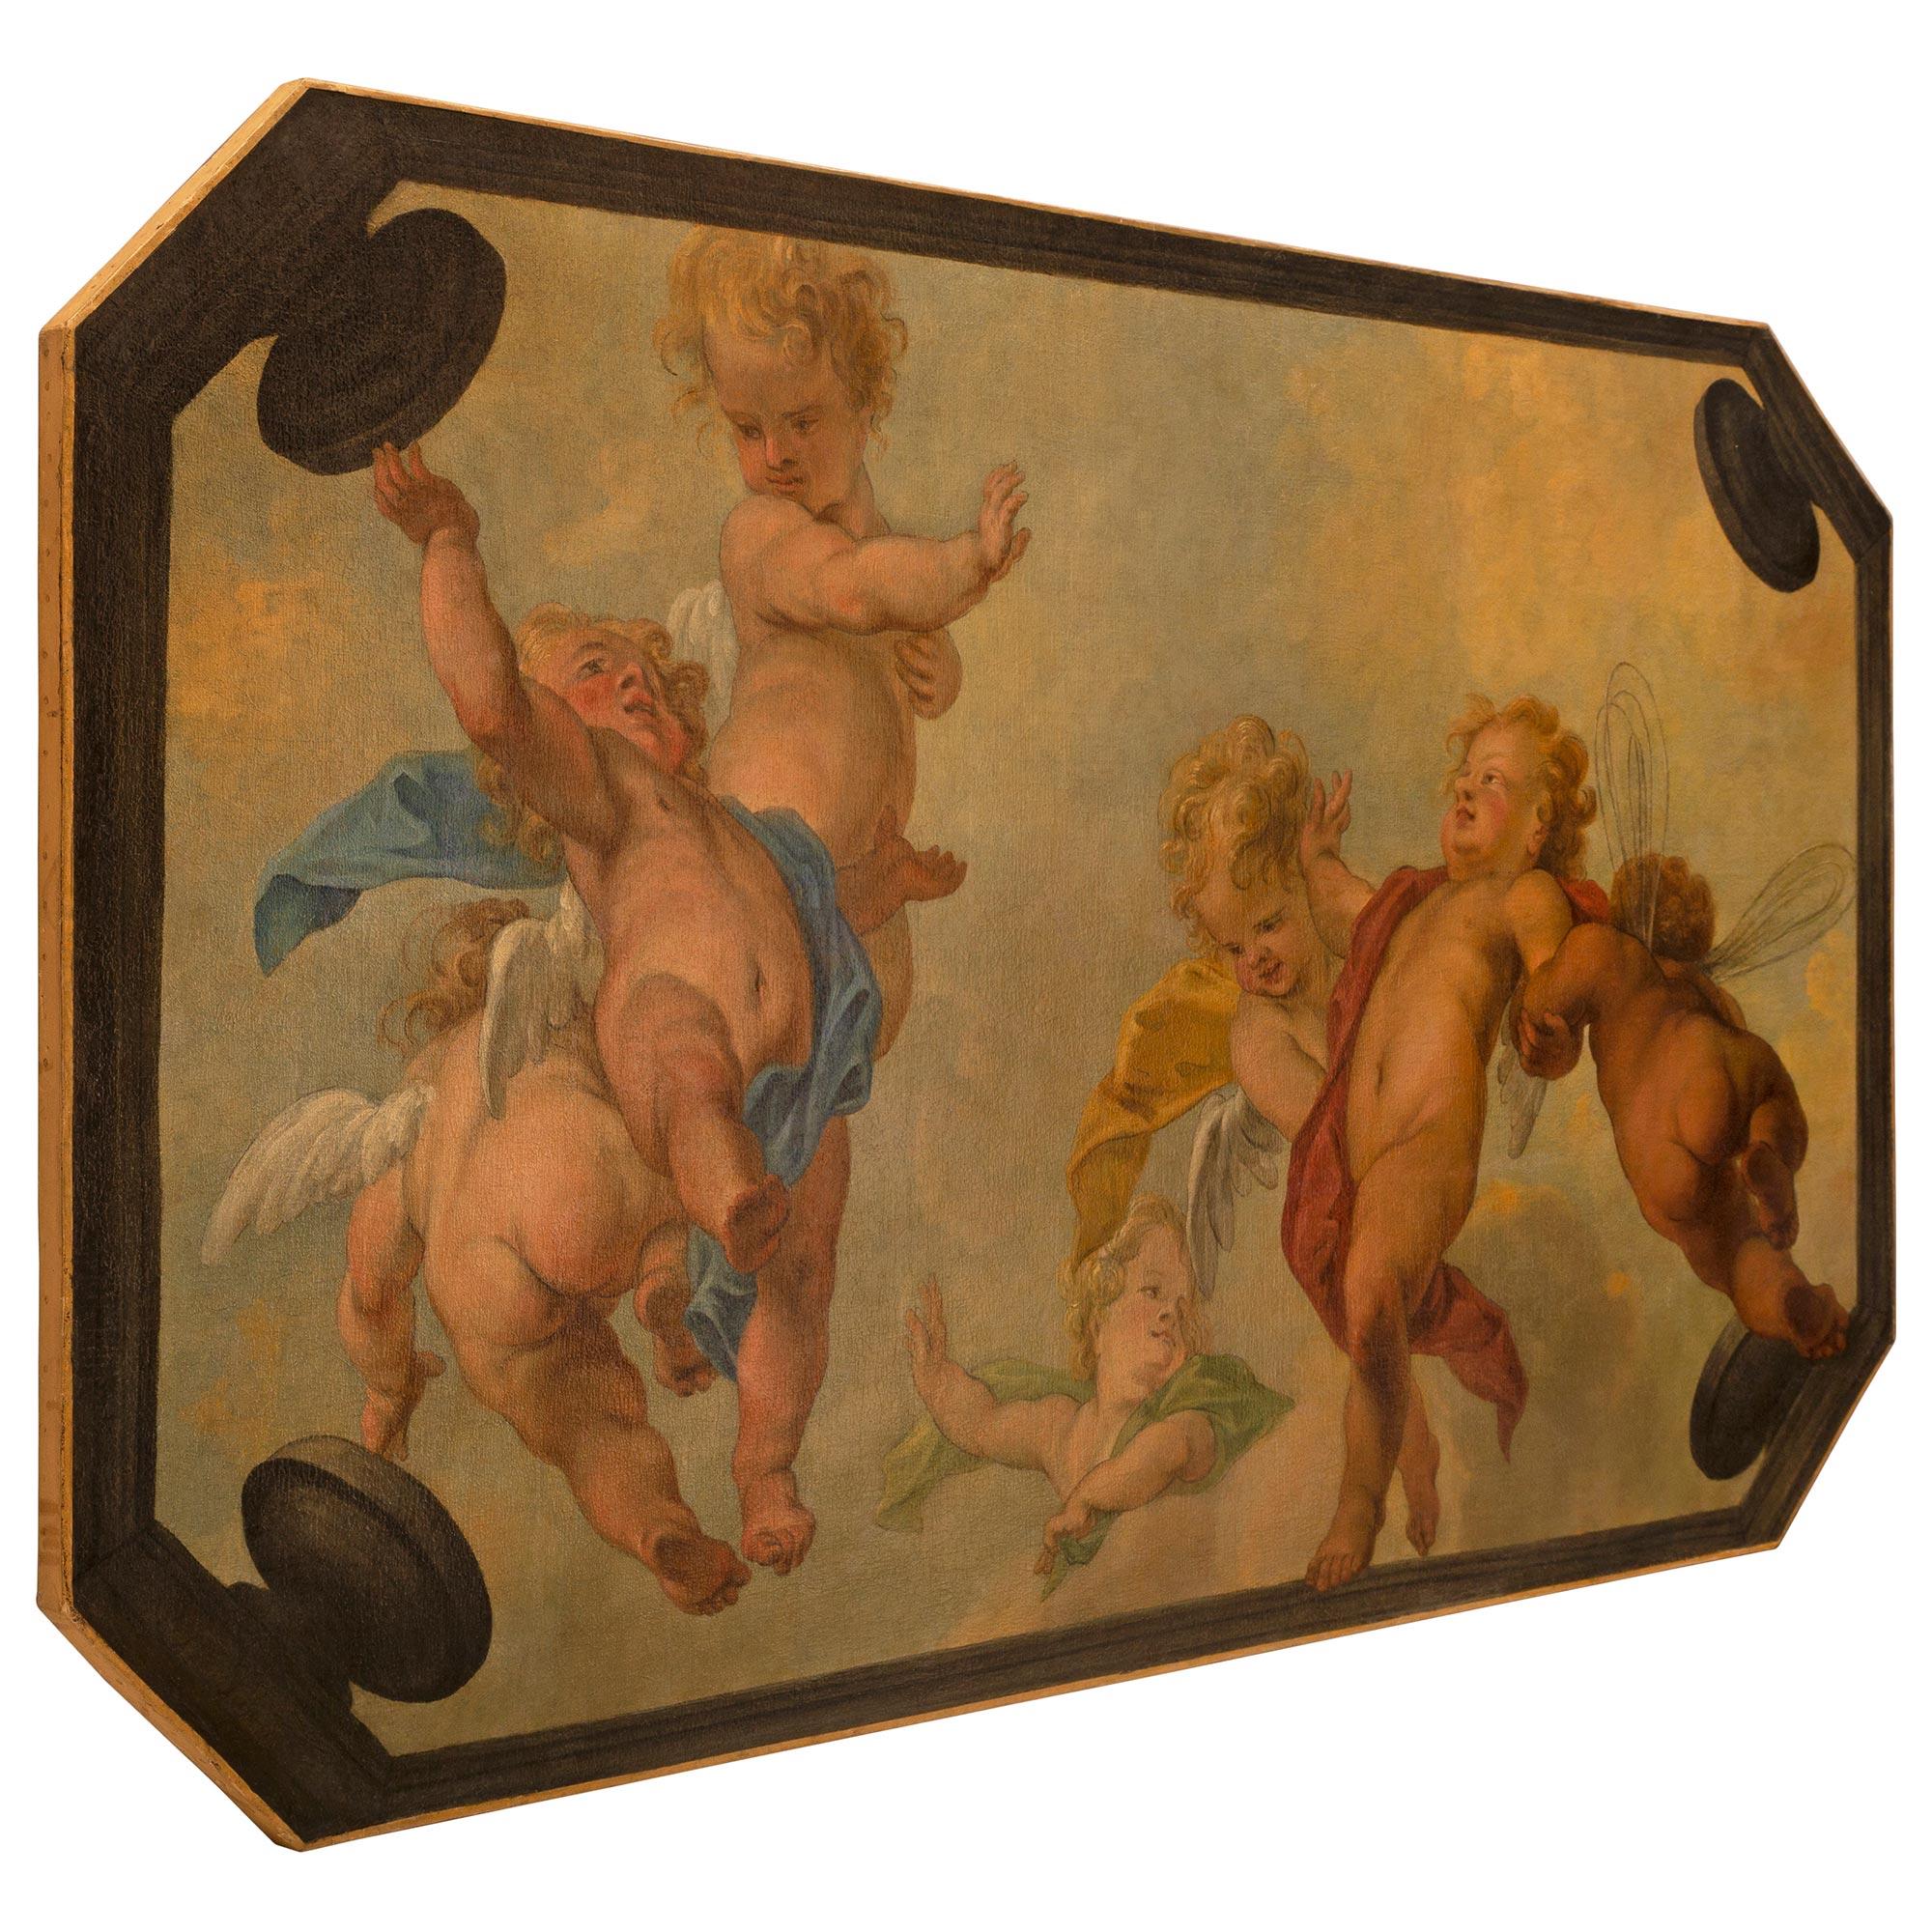 A beautiful wonderfully executed Italian 19th century Neo-Classical oil on canvas ceiling painting. The elongated octagonal shaped painting depicts seven charming finely detailed winged cherubs draped in flowing fabric garlands amidst clouds in the